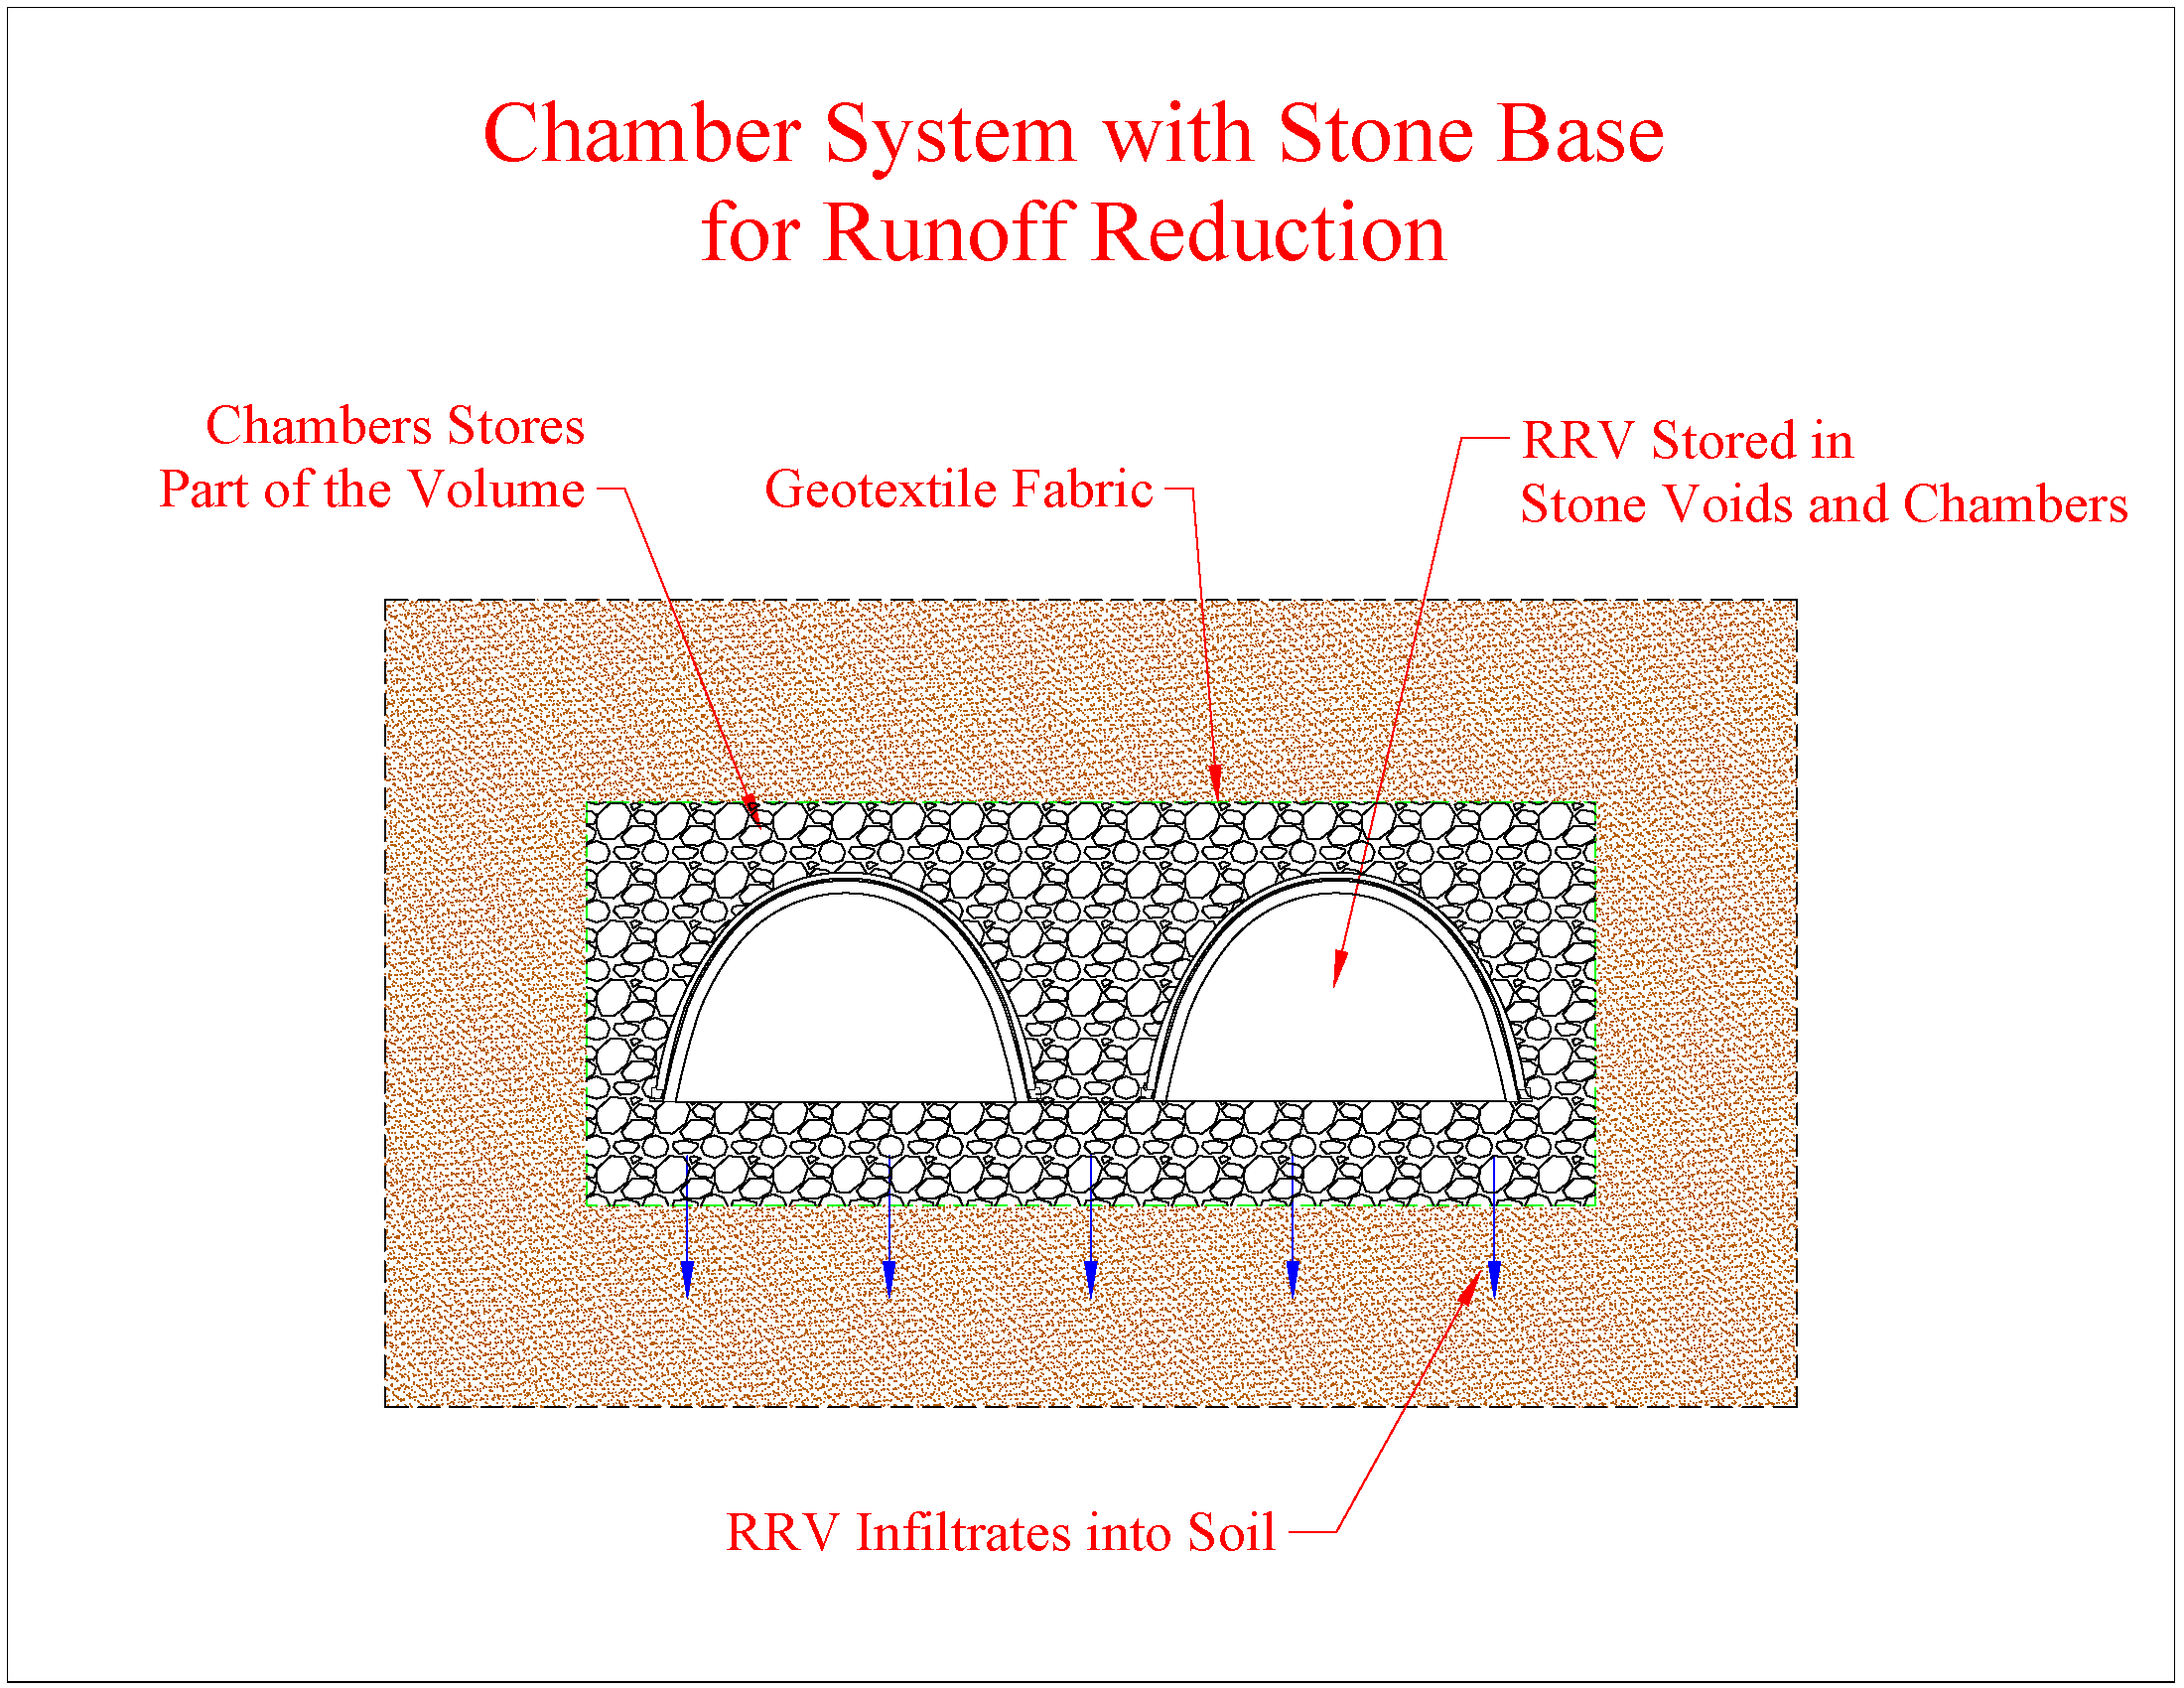 Chambers for RRV